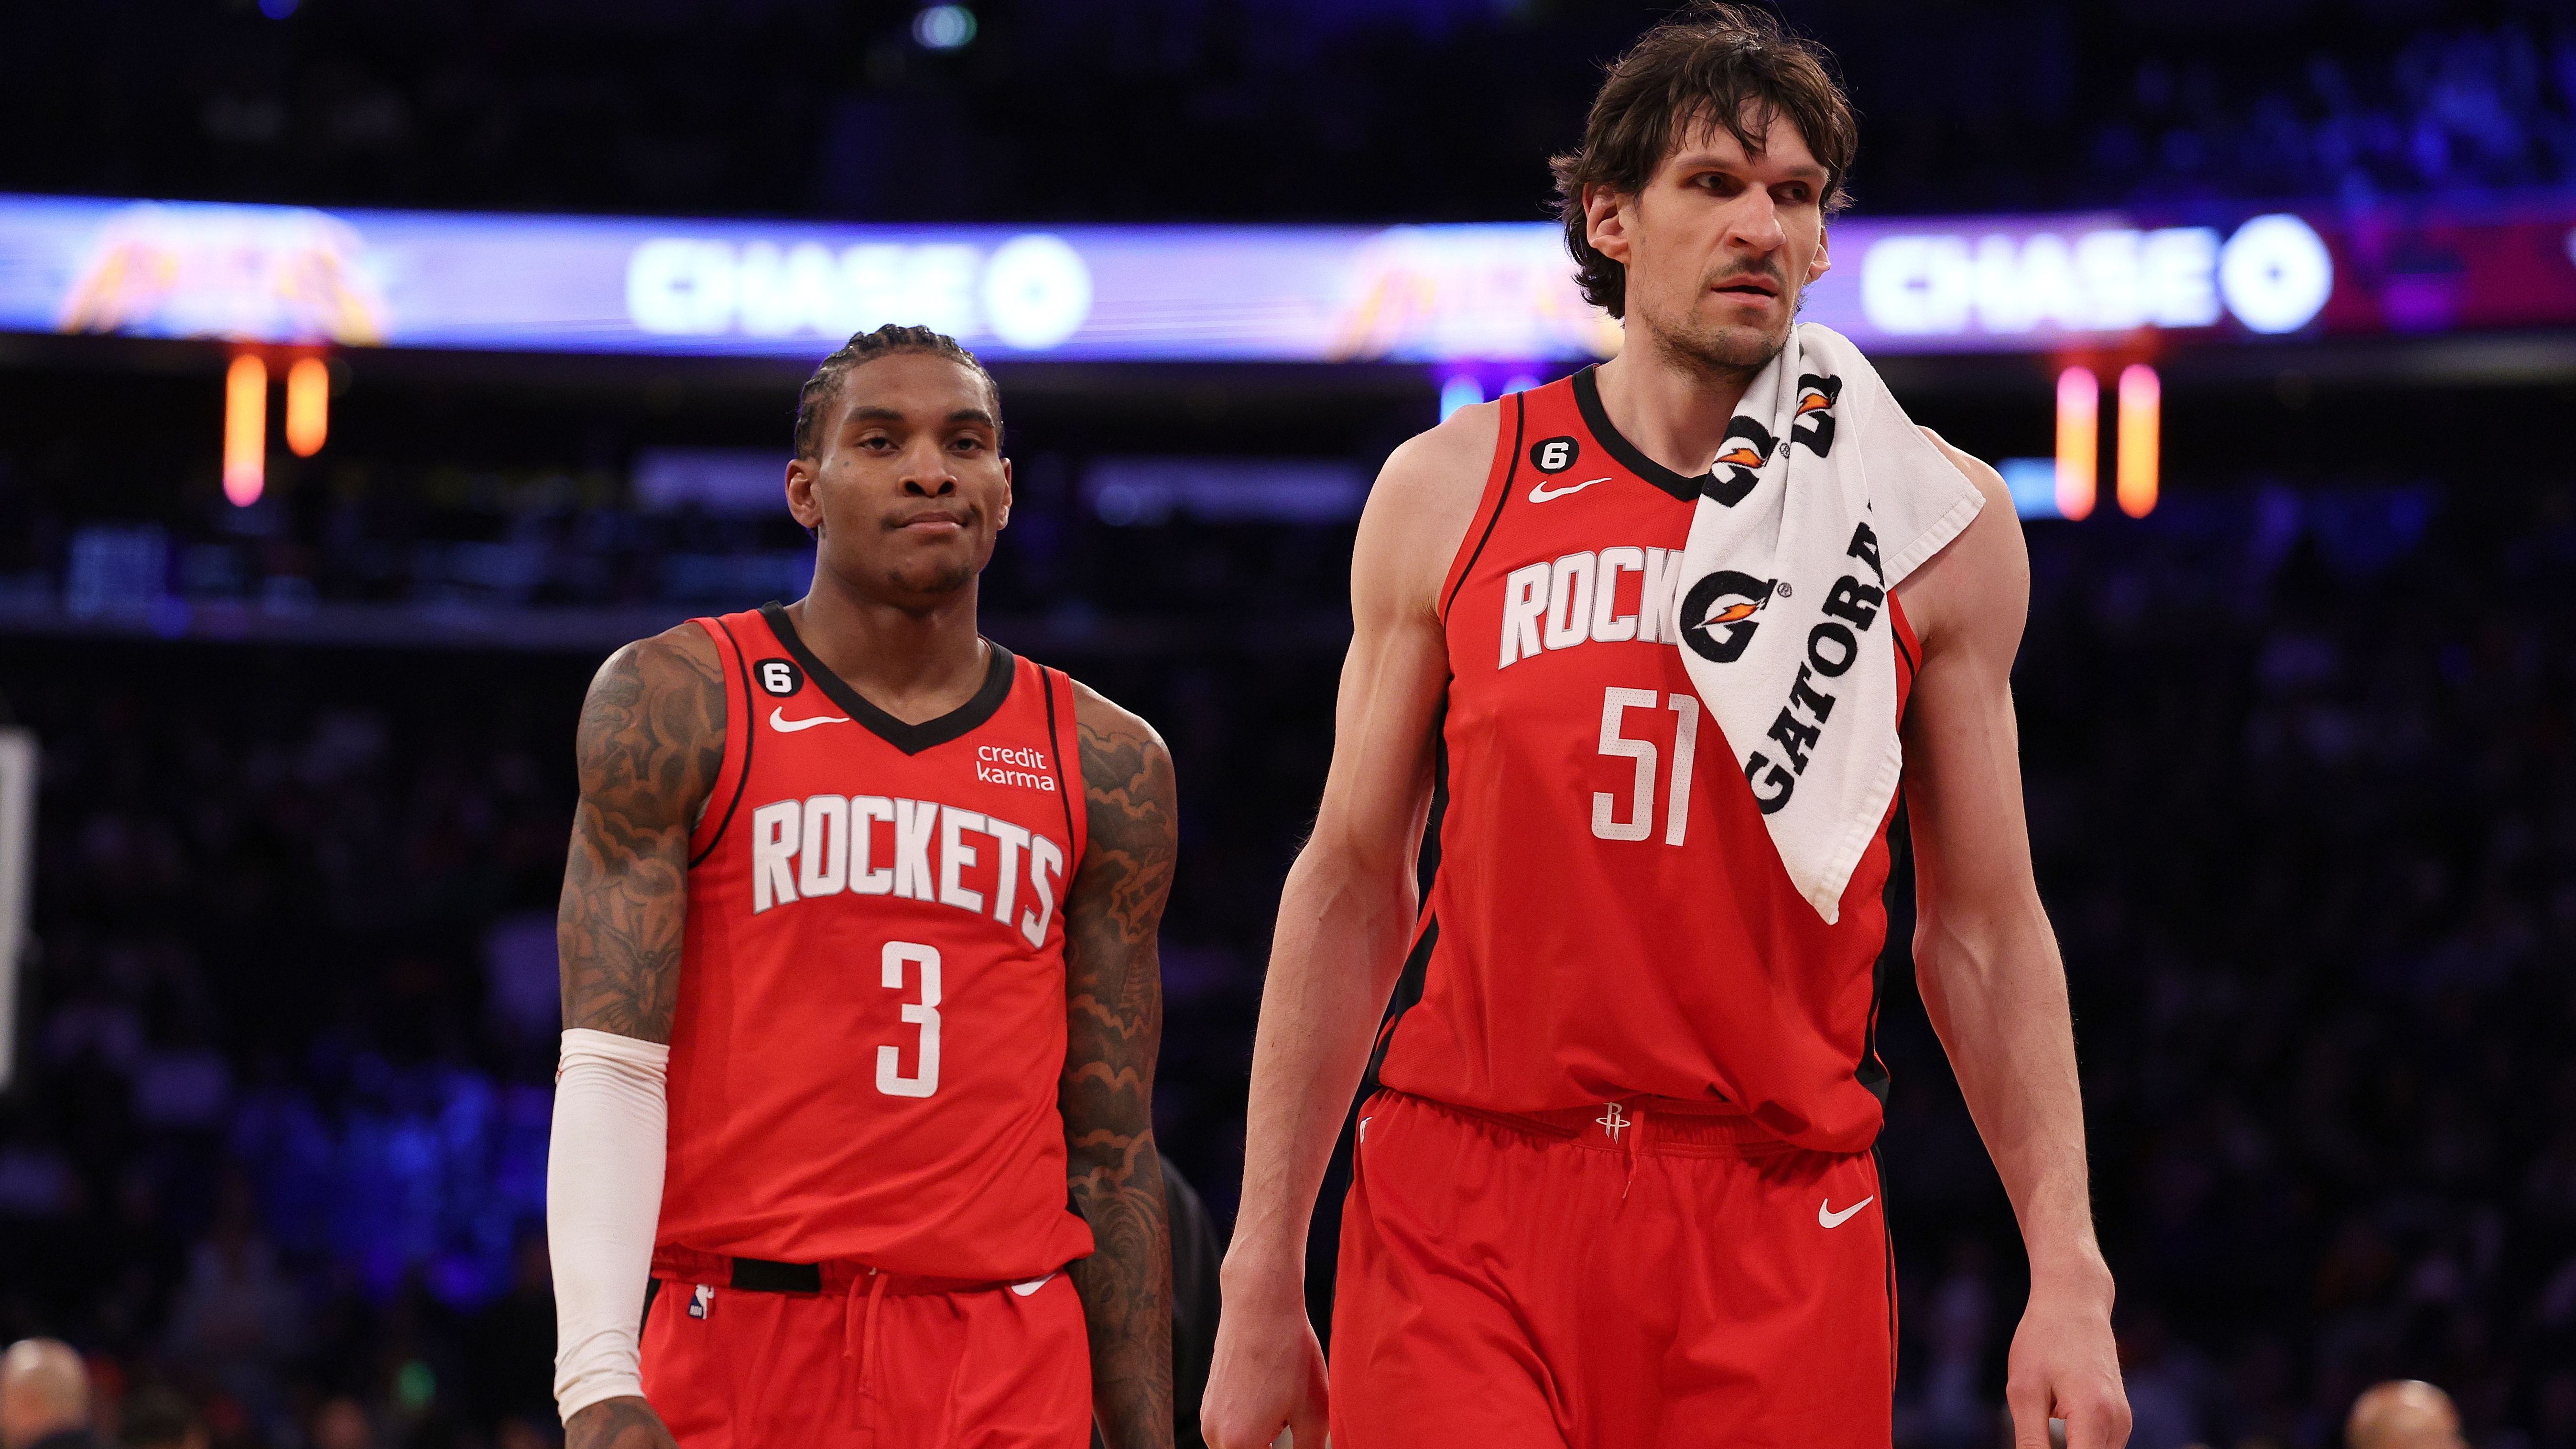 <strong>Boban Marjanovic - 2,24m</strong><br><strong>Teams:</strong> San Antonio Spurs, Detroit Pistons, Los Angeles Clippers, Philadelphia 76ers, Dallas Mavericks, Houston Rockets<br><strong>Karriere-Stats:</strong> 2,6 Punkte, 2,4 Rebounds, 0,4 Assists, <br><strong>Auszeichnungen:</strong> -